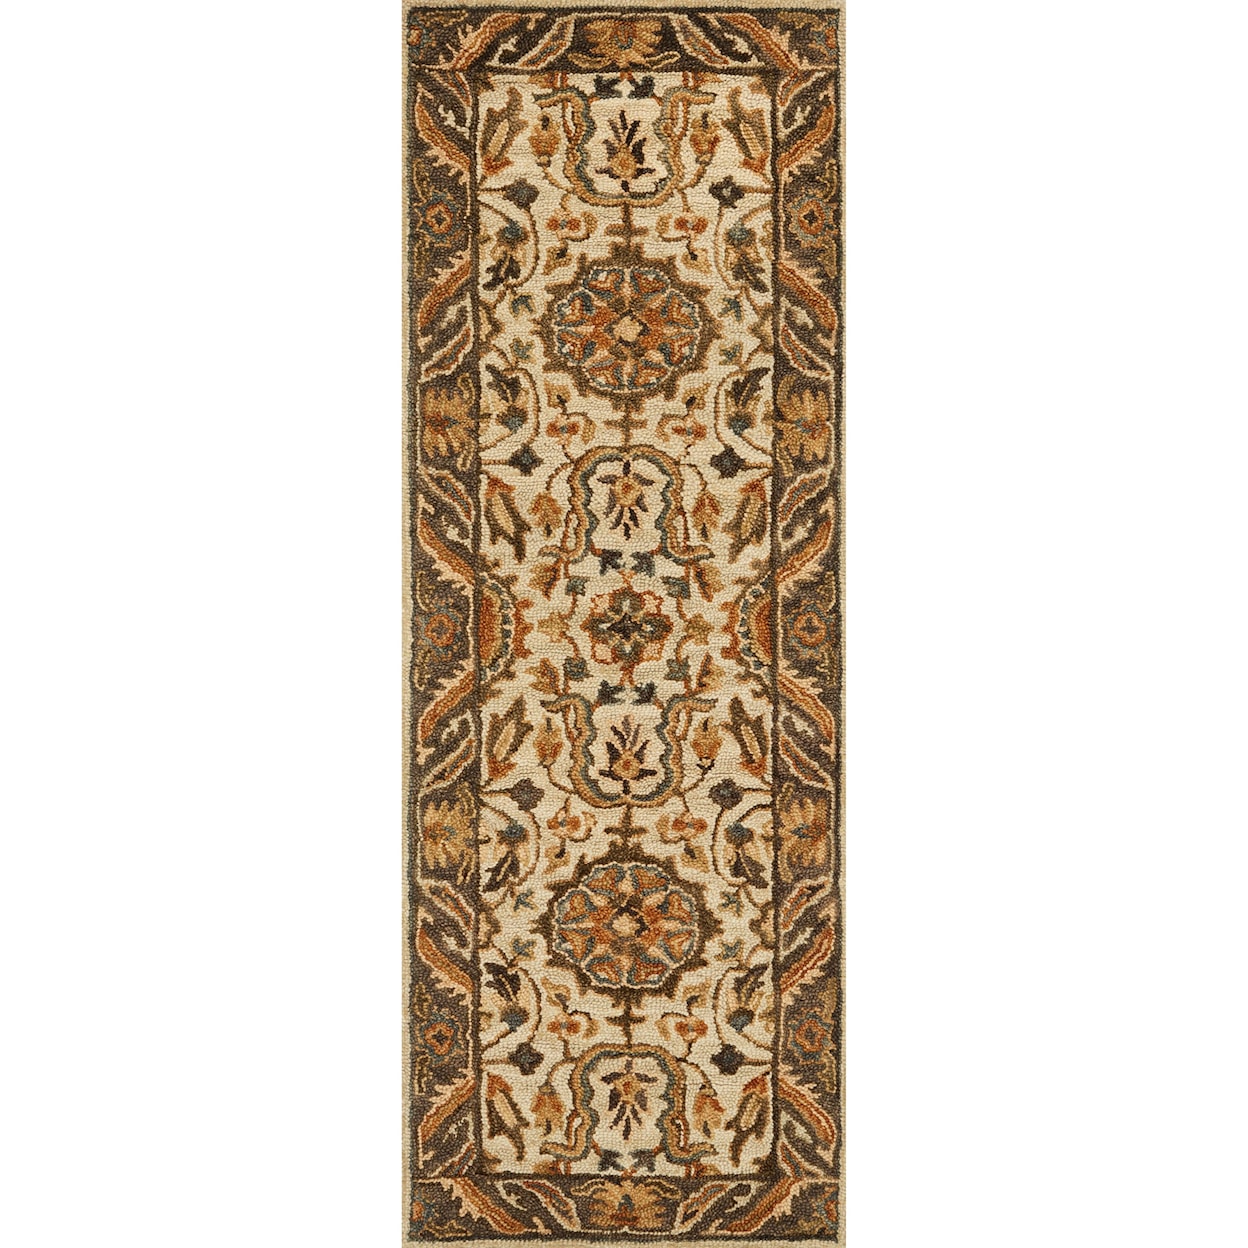 Reeds Rugs Victoria 1'6" x 1'6"  Ivory / Dk Taupe Rug